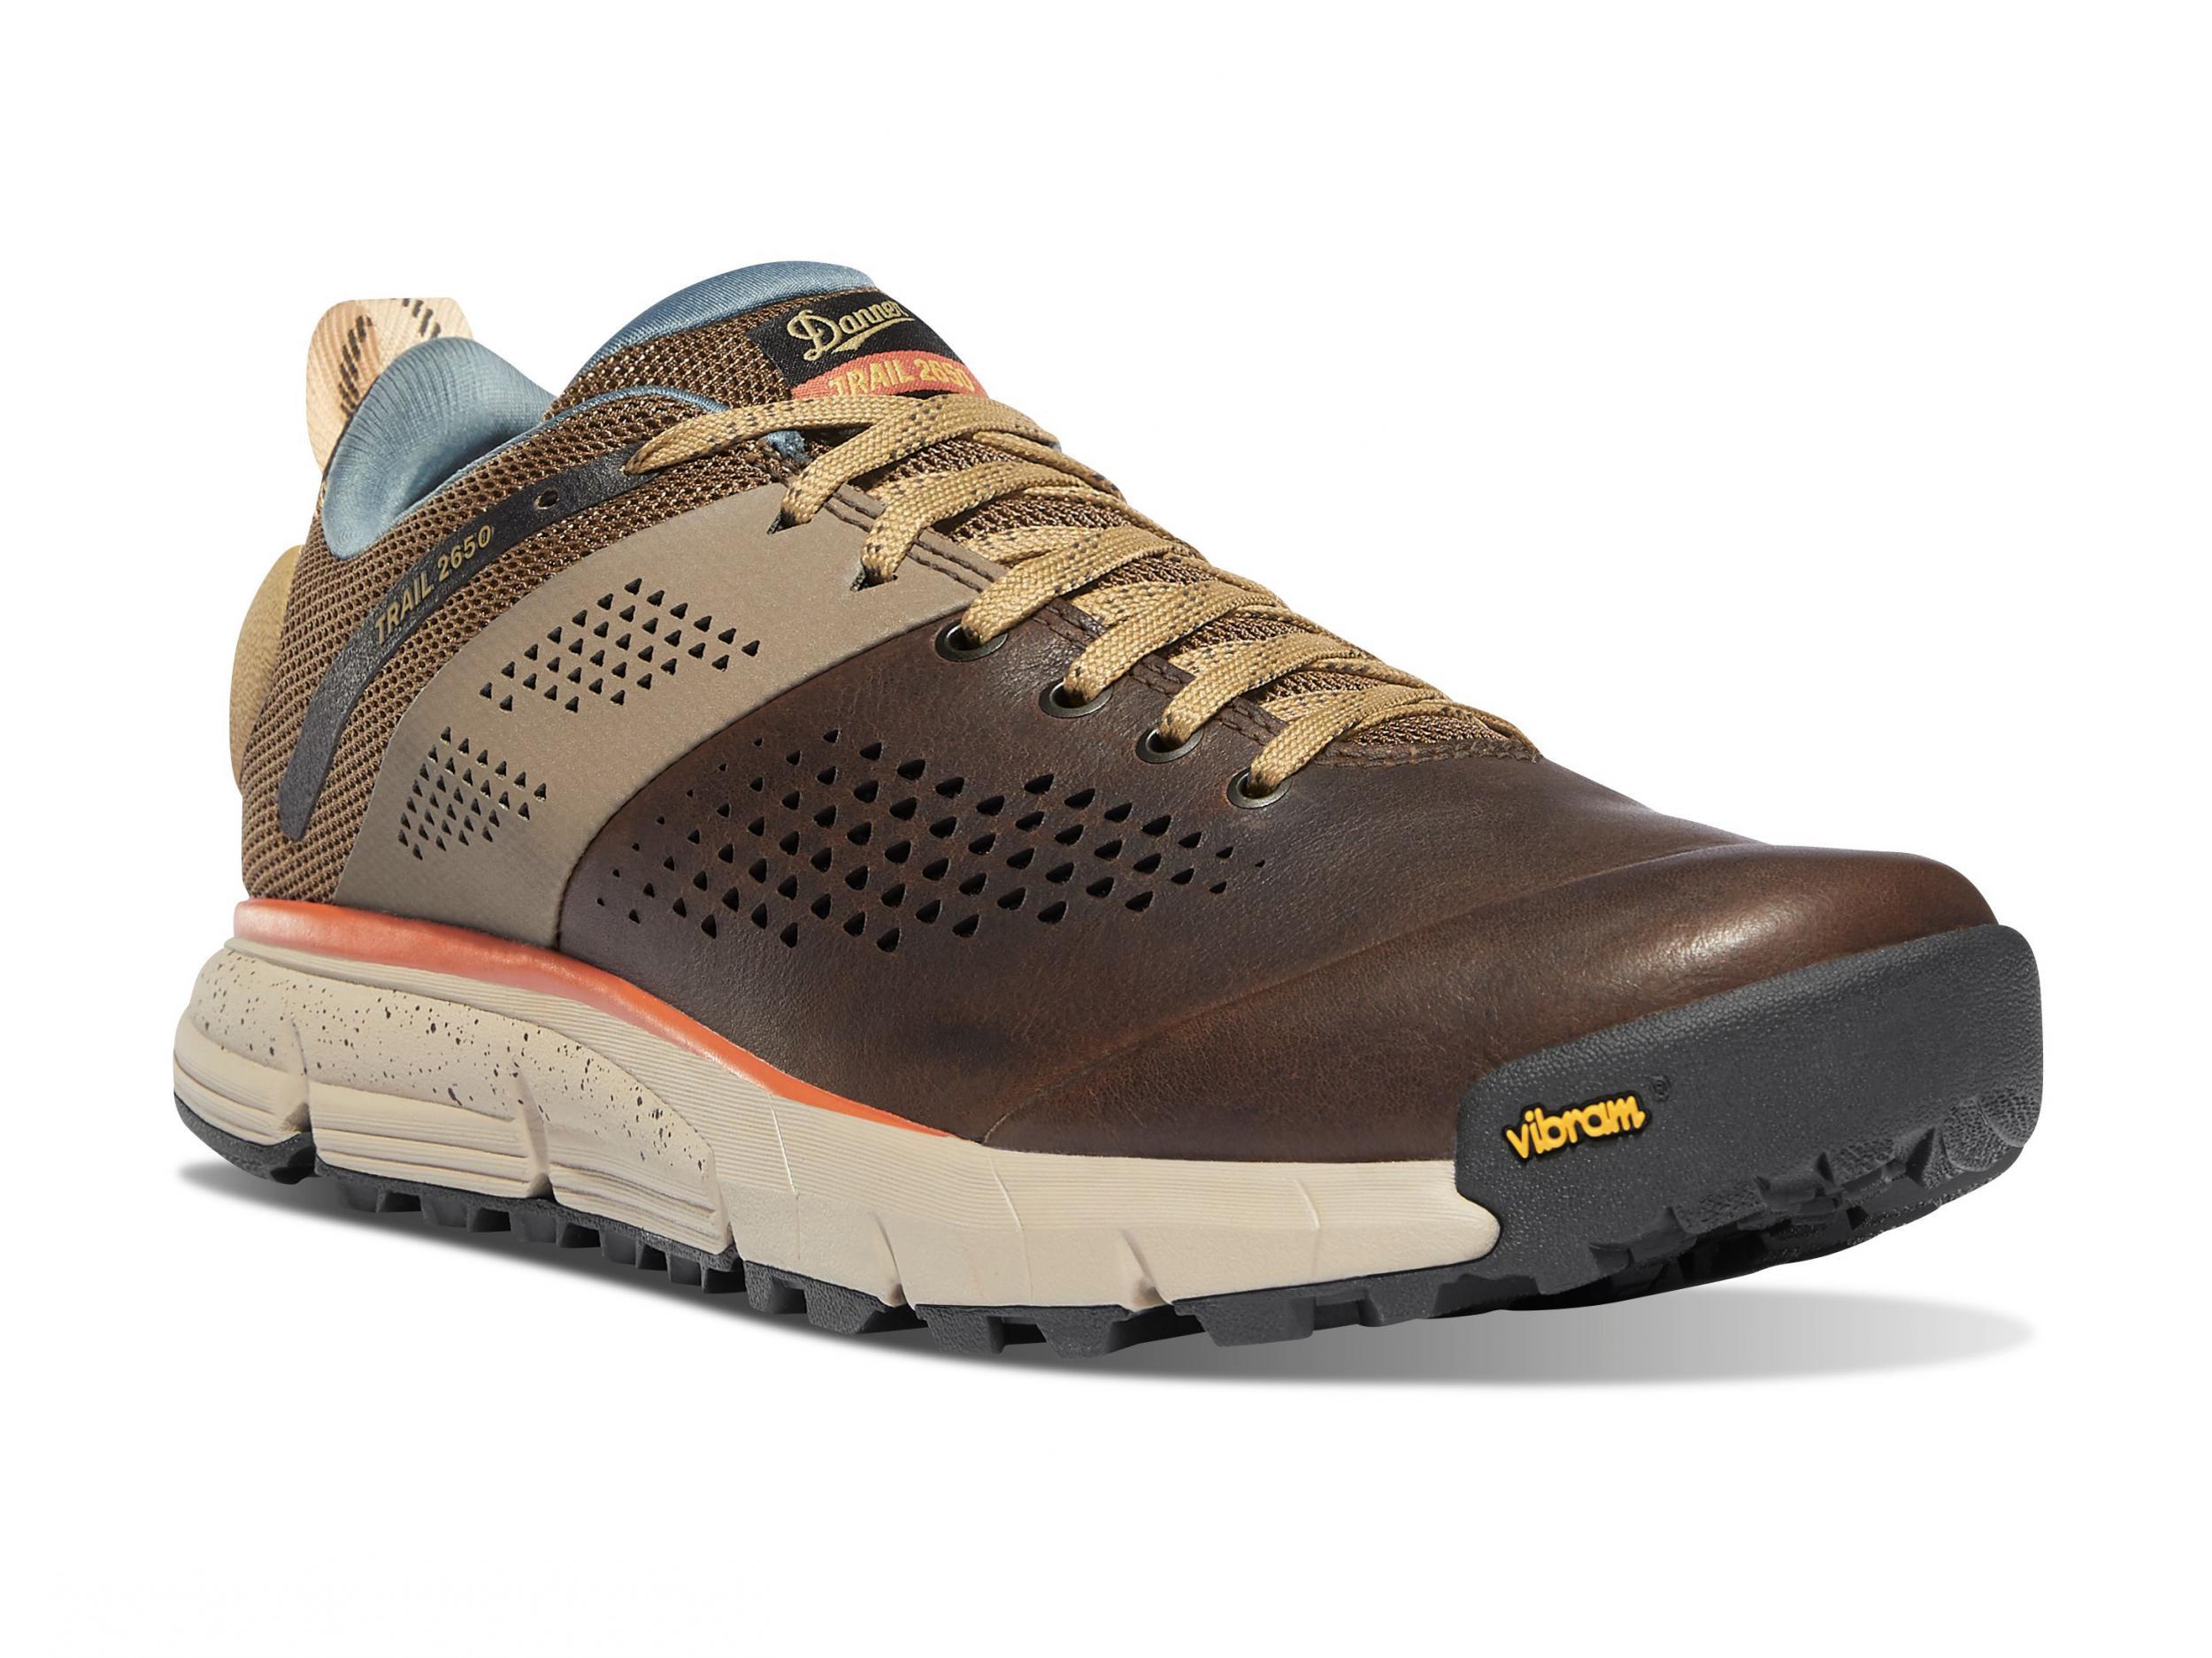 wide hiking shoes for men